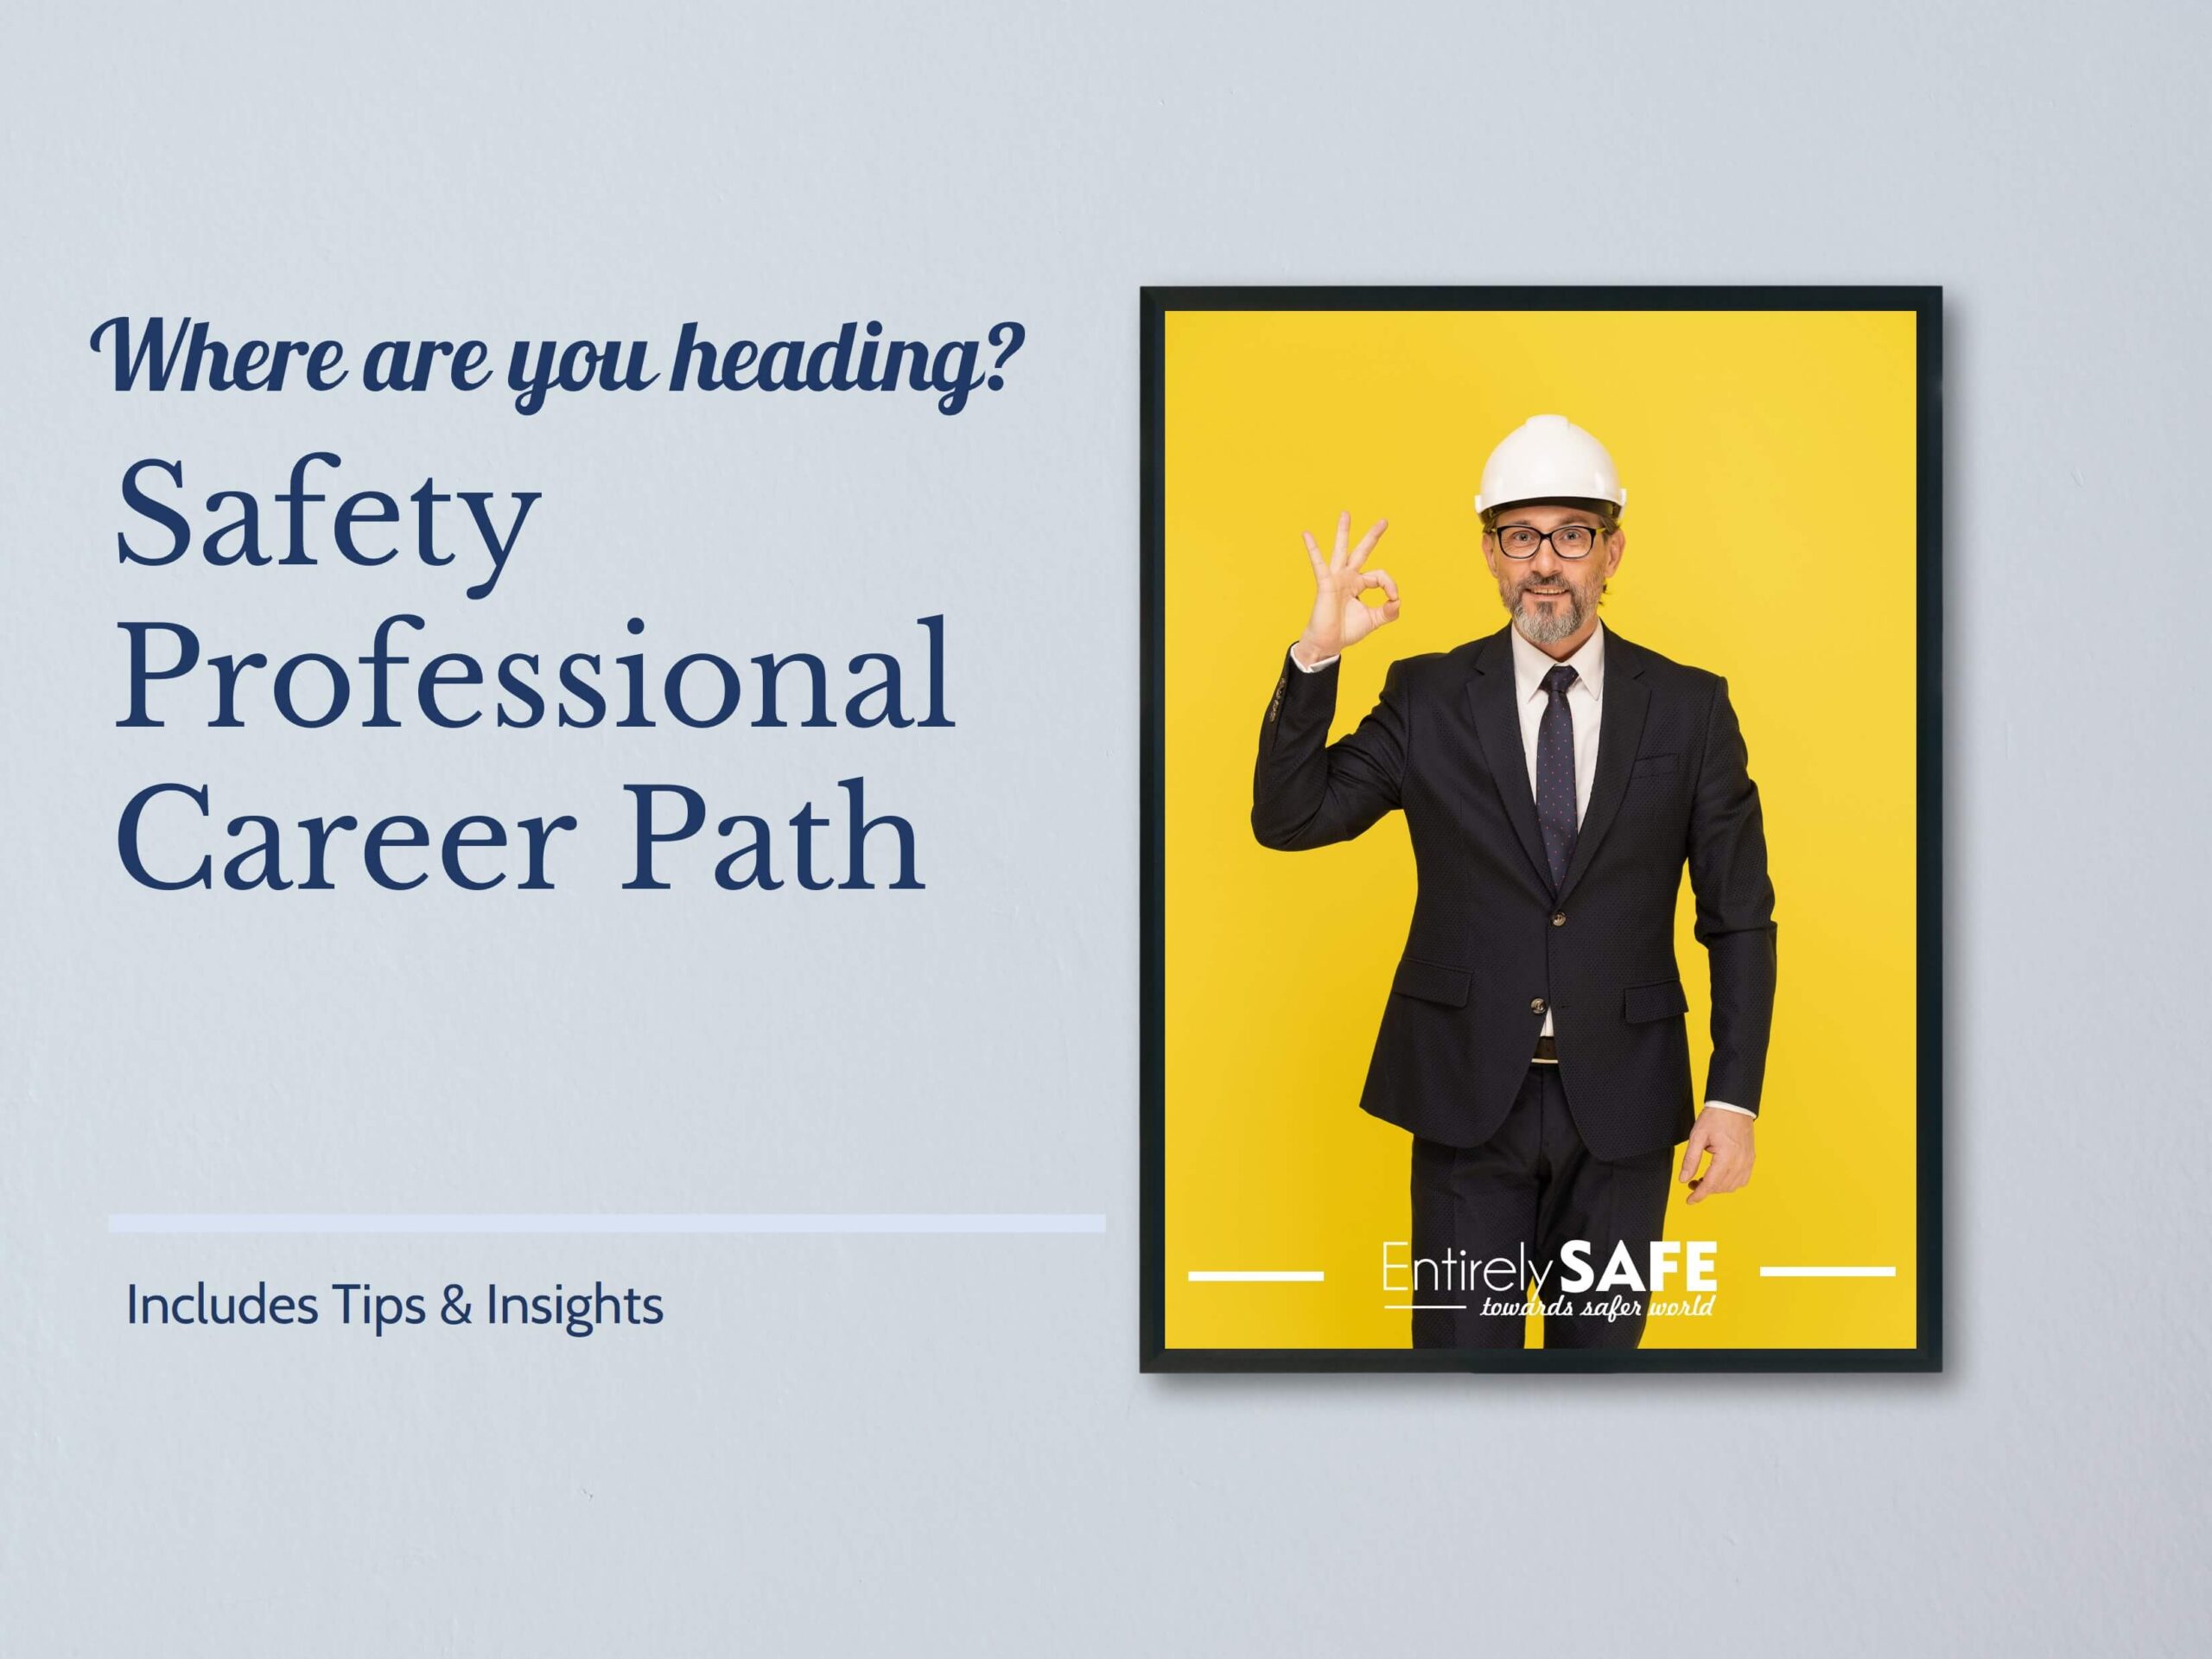 Where are you Heading? Safety Professional Career Path (includes Tips and Insights)